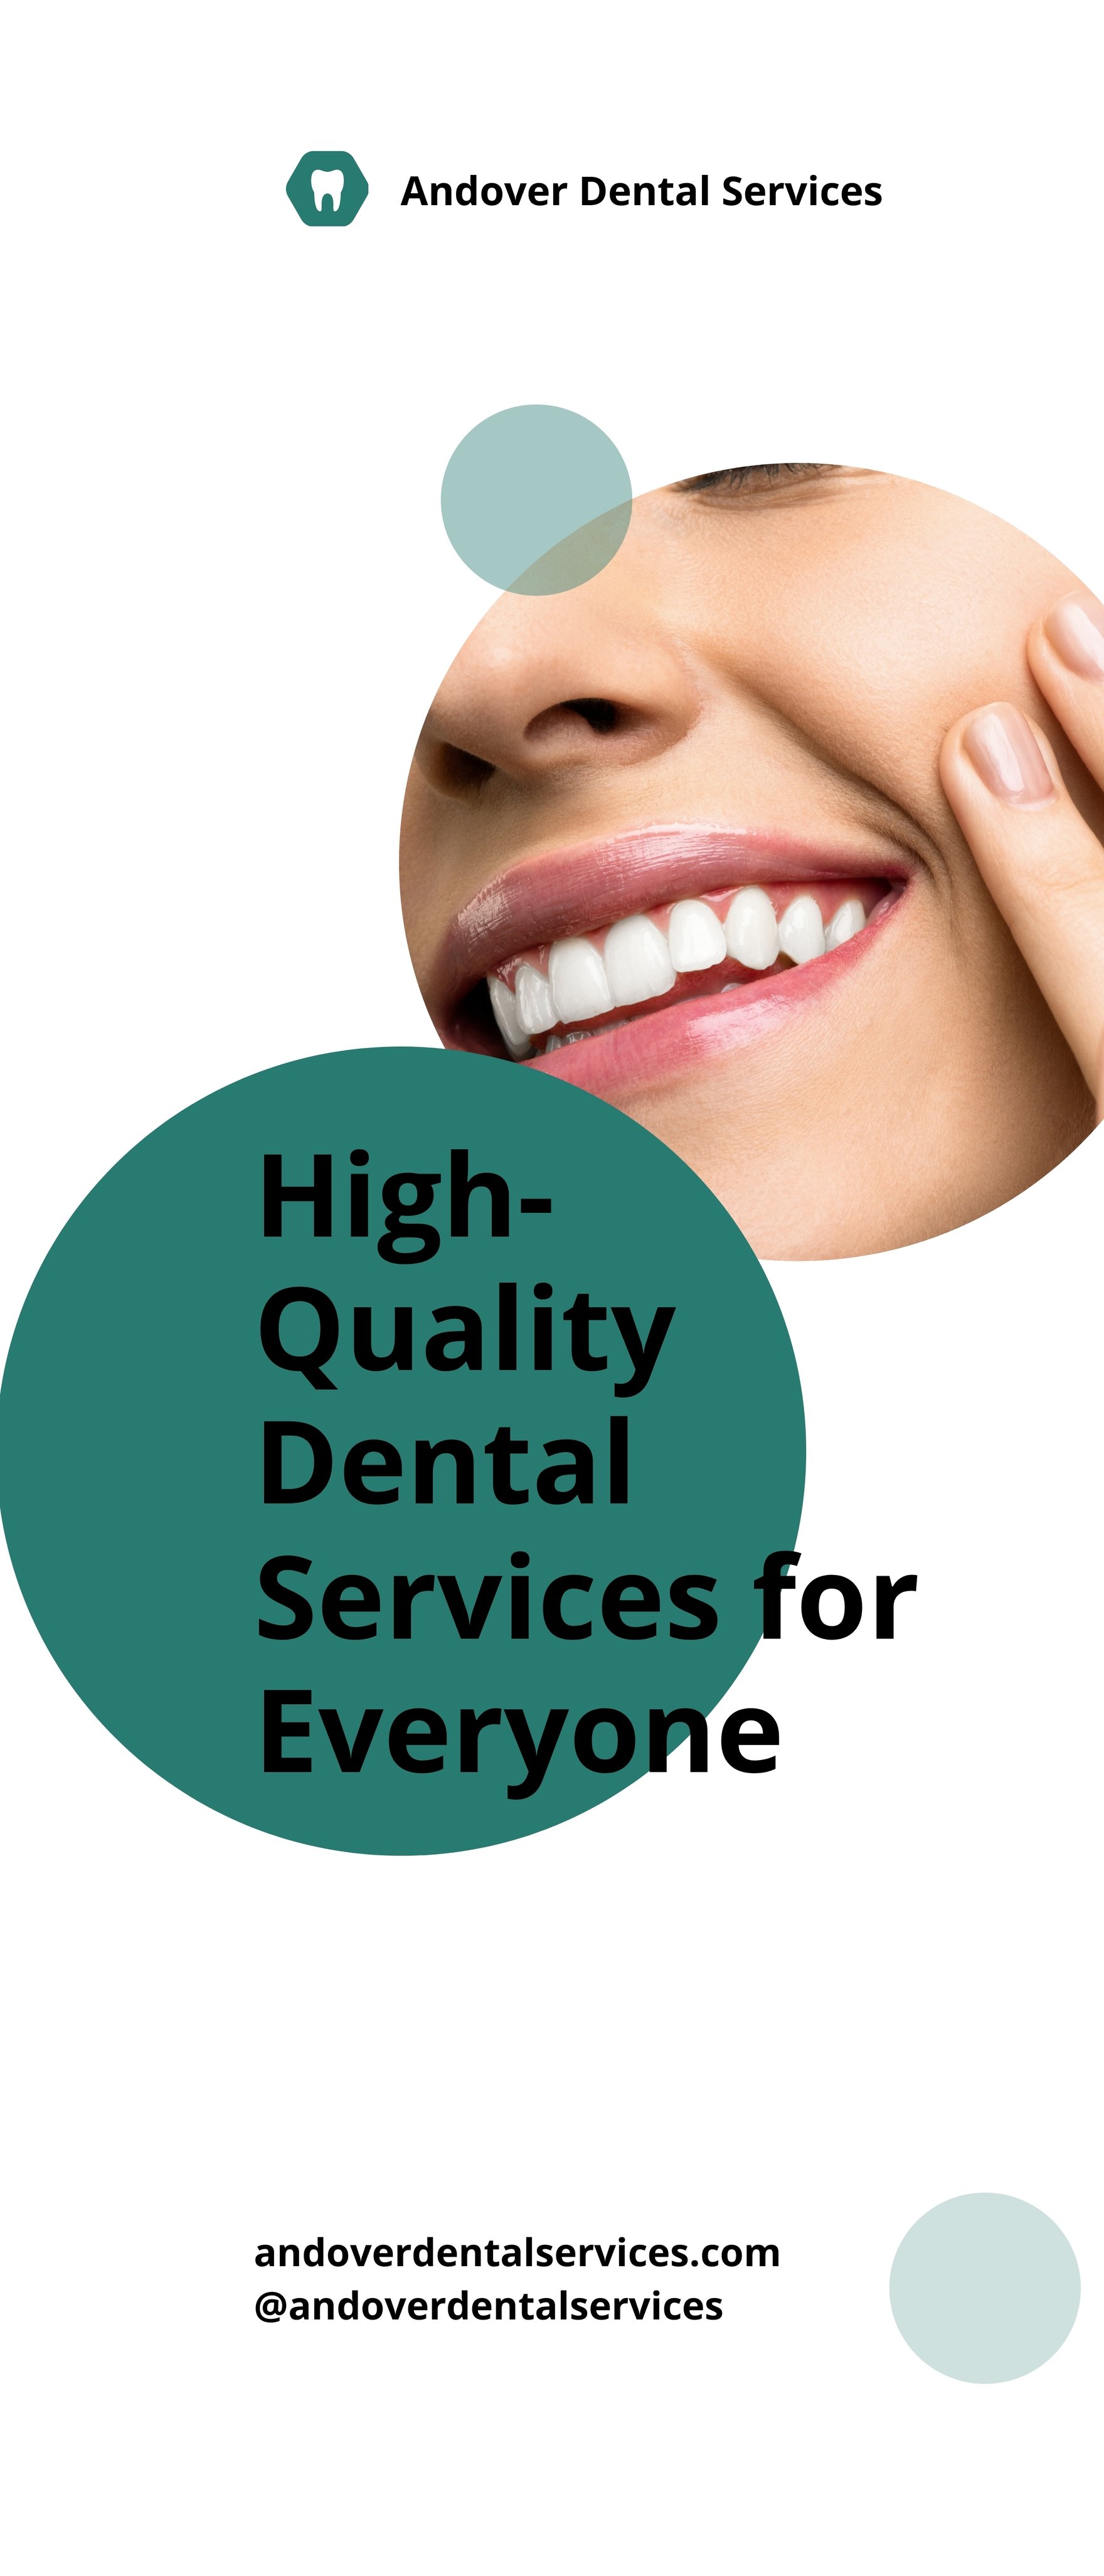 Free Medical Dental Service Roll Up Banner Template in Word, Google Docs, Publisher